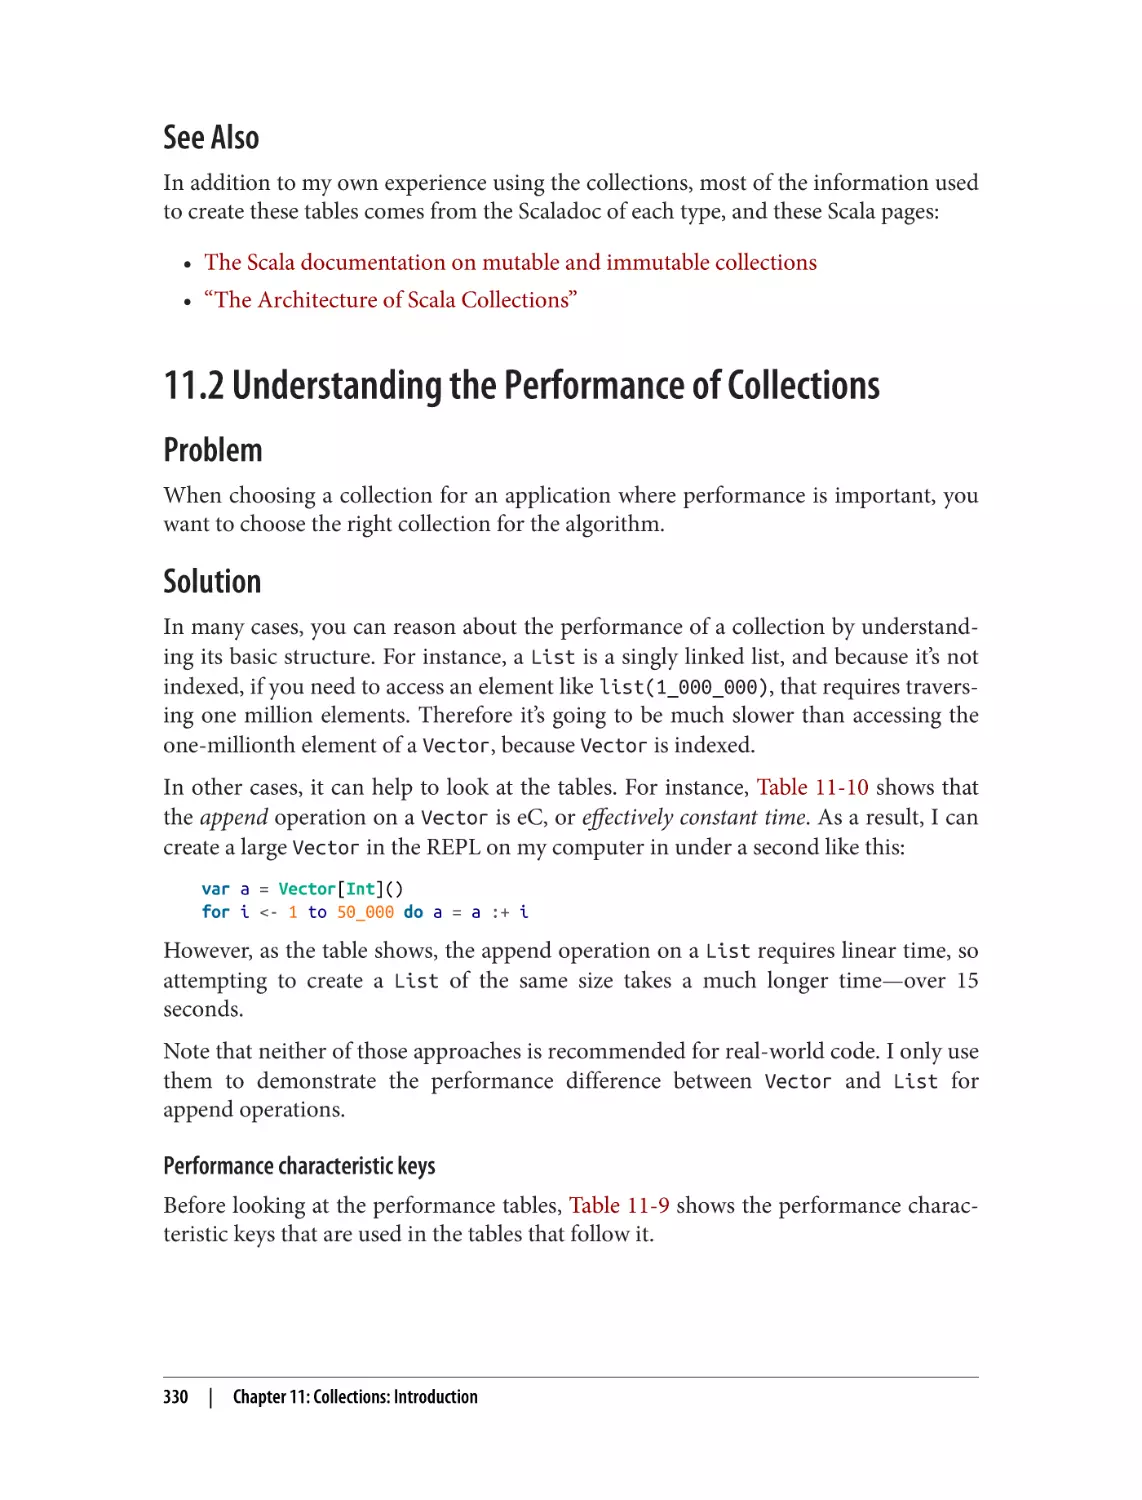 See Also
11.2 Understanding the Performance of Collections
Problem
Solution